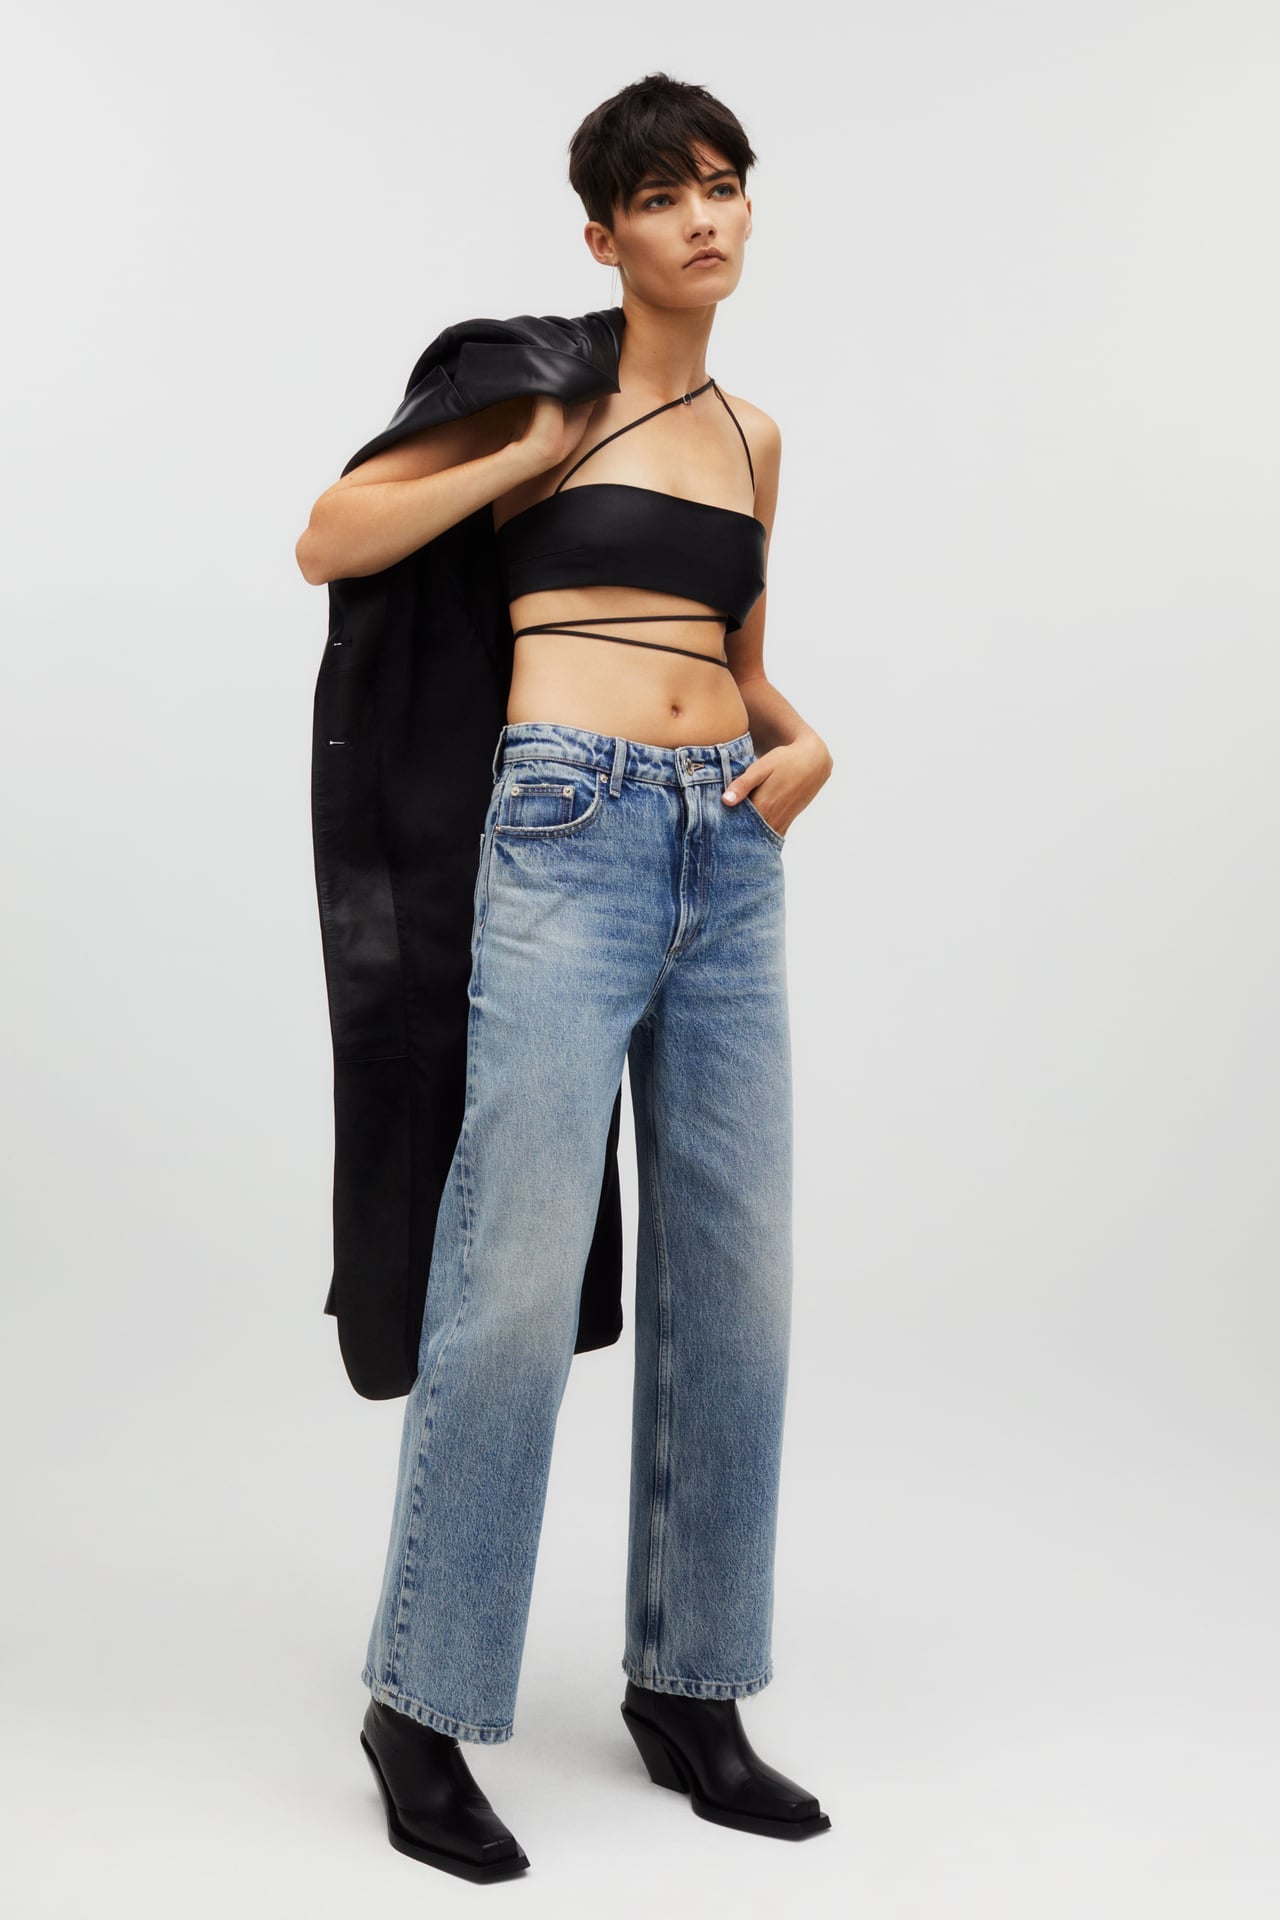 Zara's Loungewear Section Is So Good I May Never Want to Wear Jeans Again